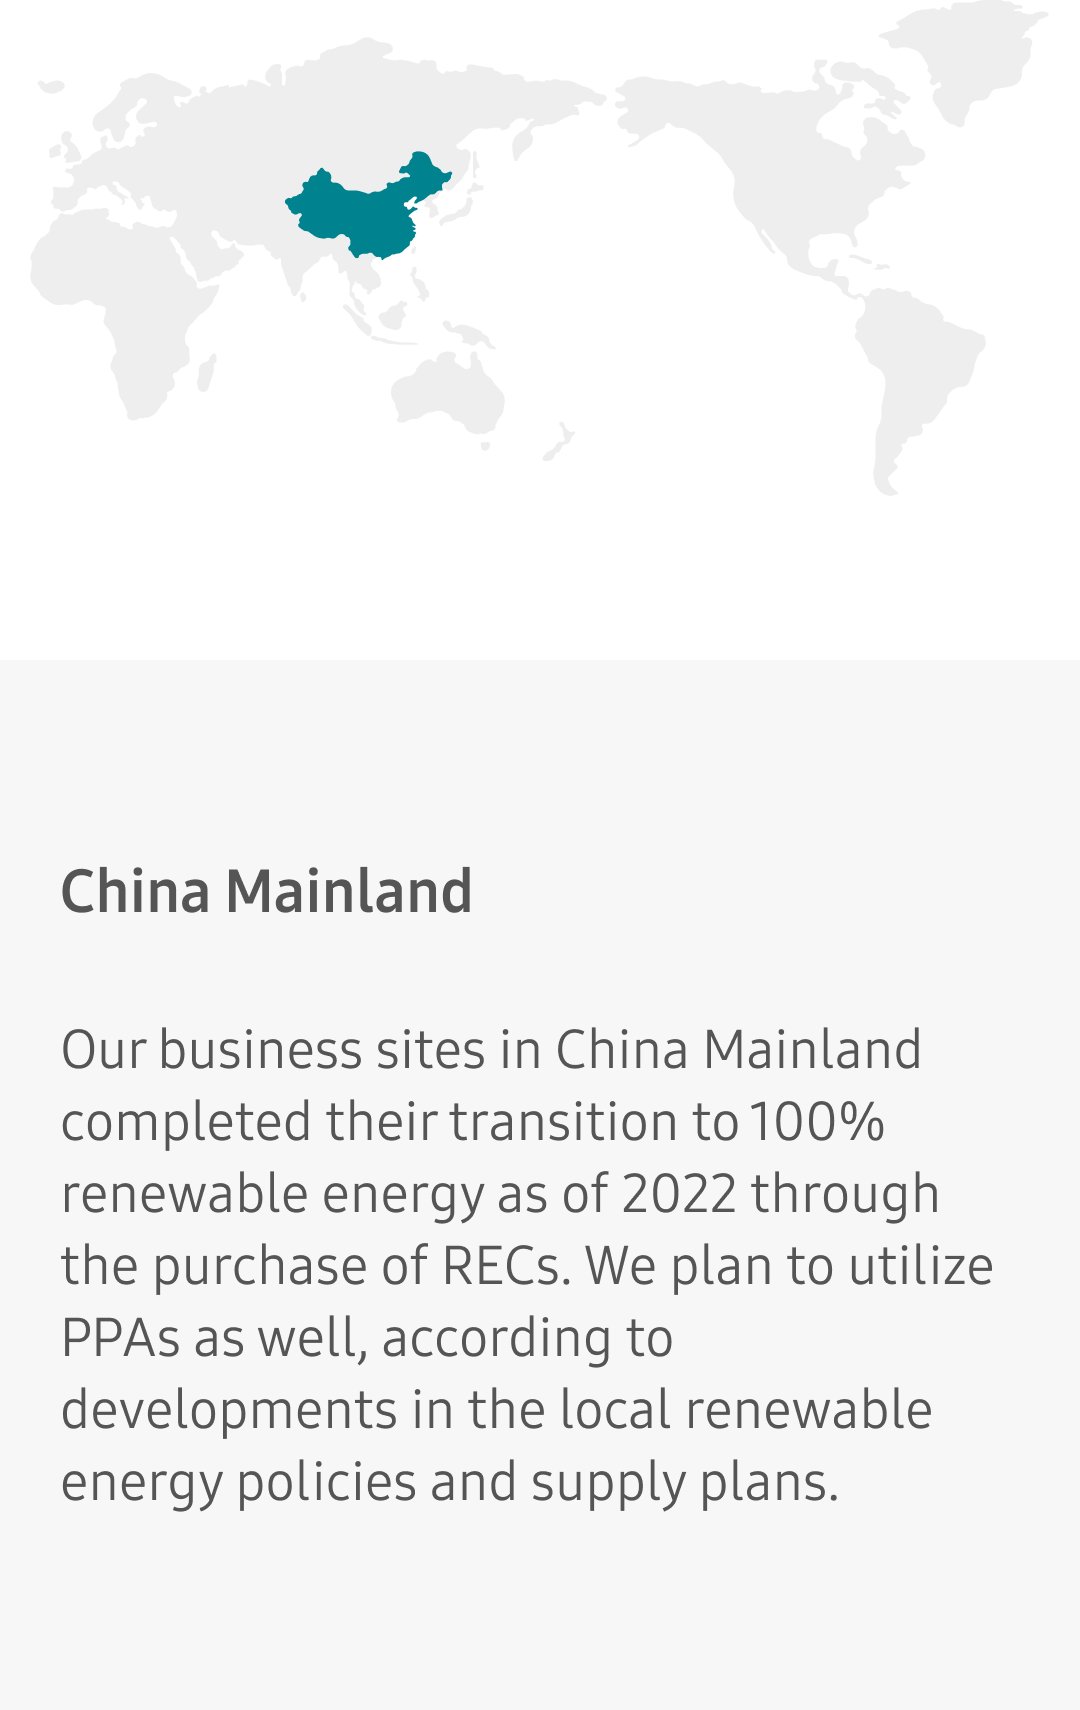 Our business sites in China completed their transition to 100% renewable energy as of 2022 through the purchase of RECs. We plan to utilize PPAs as well, according to developments in the local renewable energy policies and supply plans.